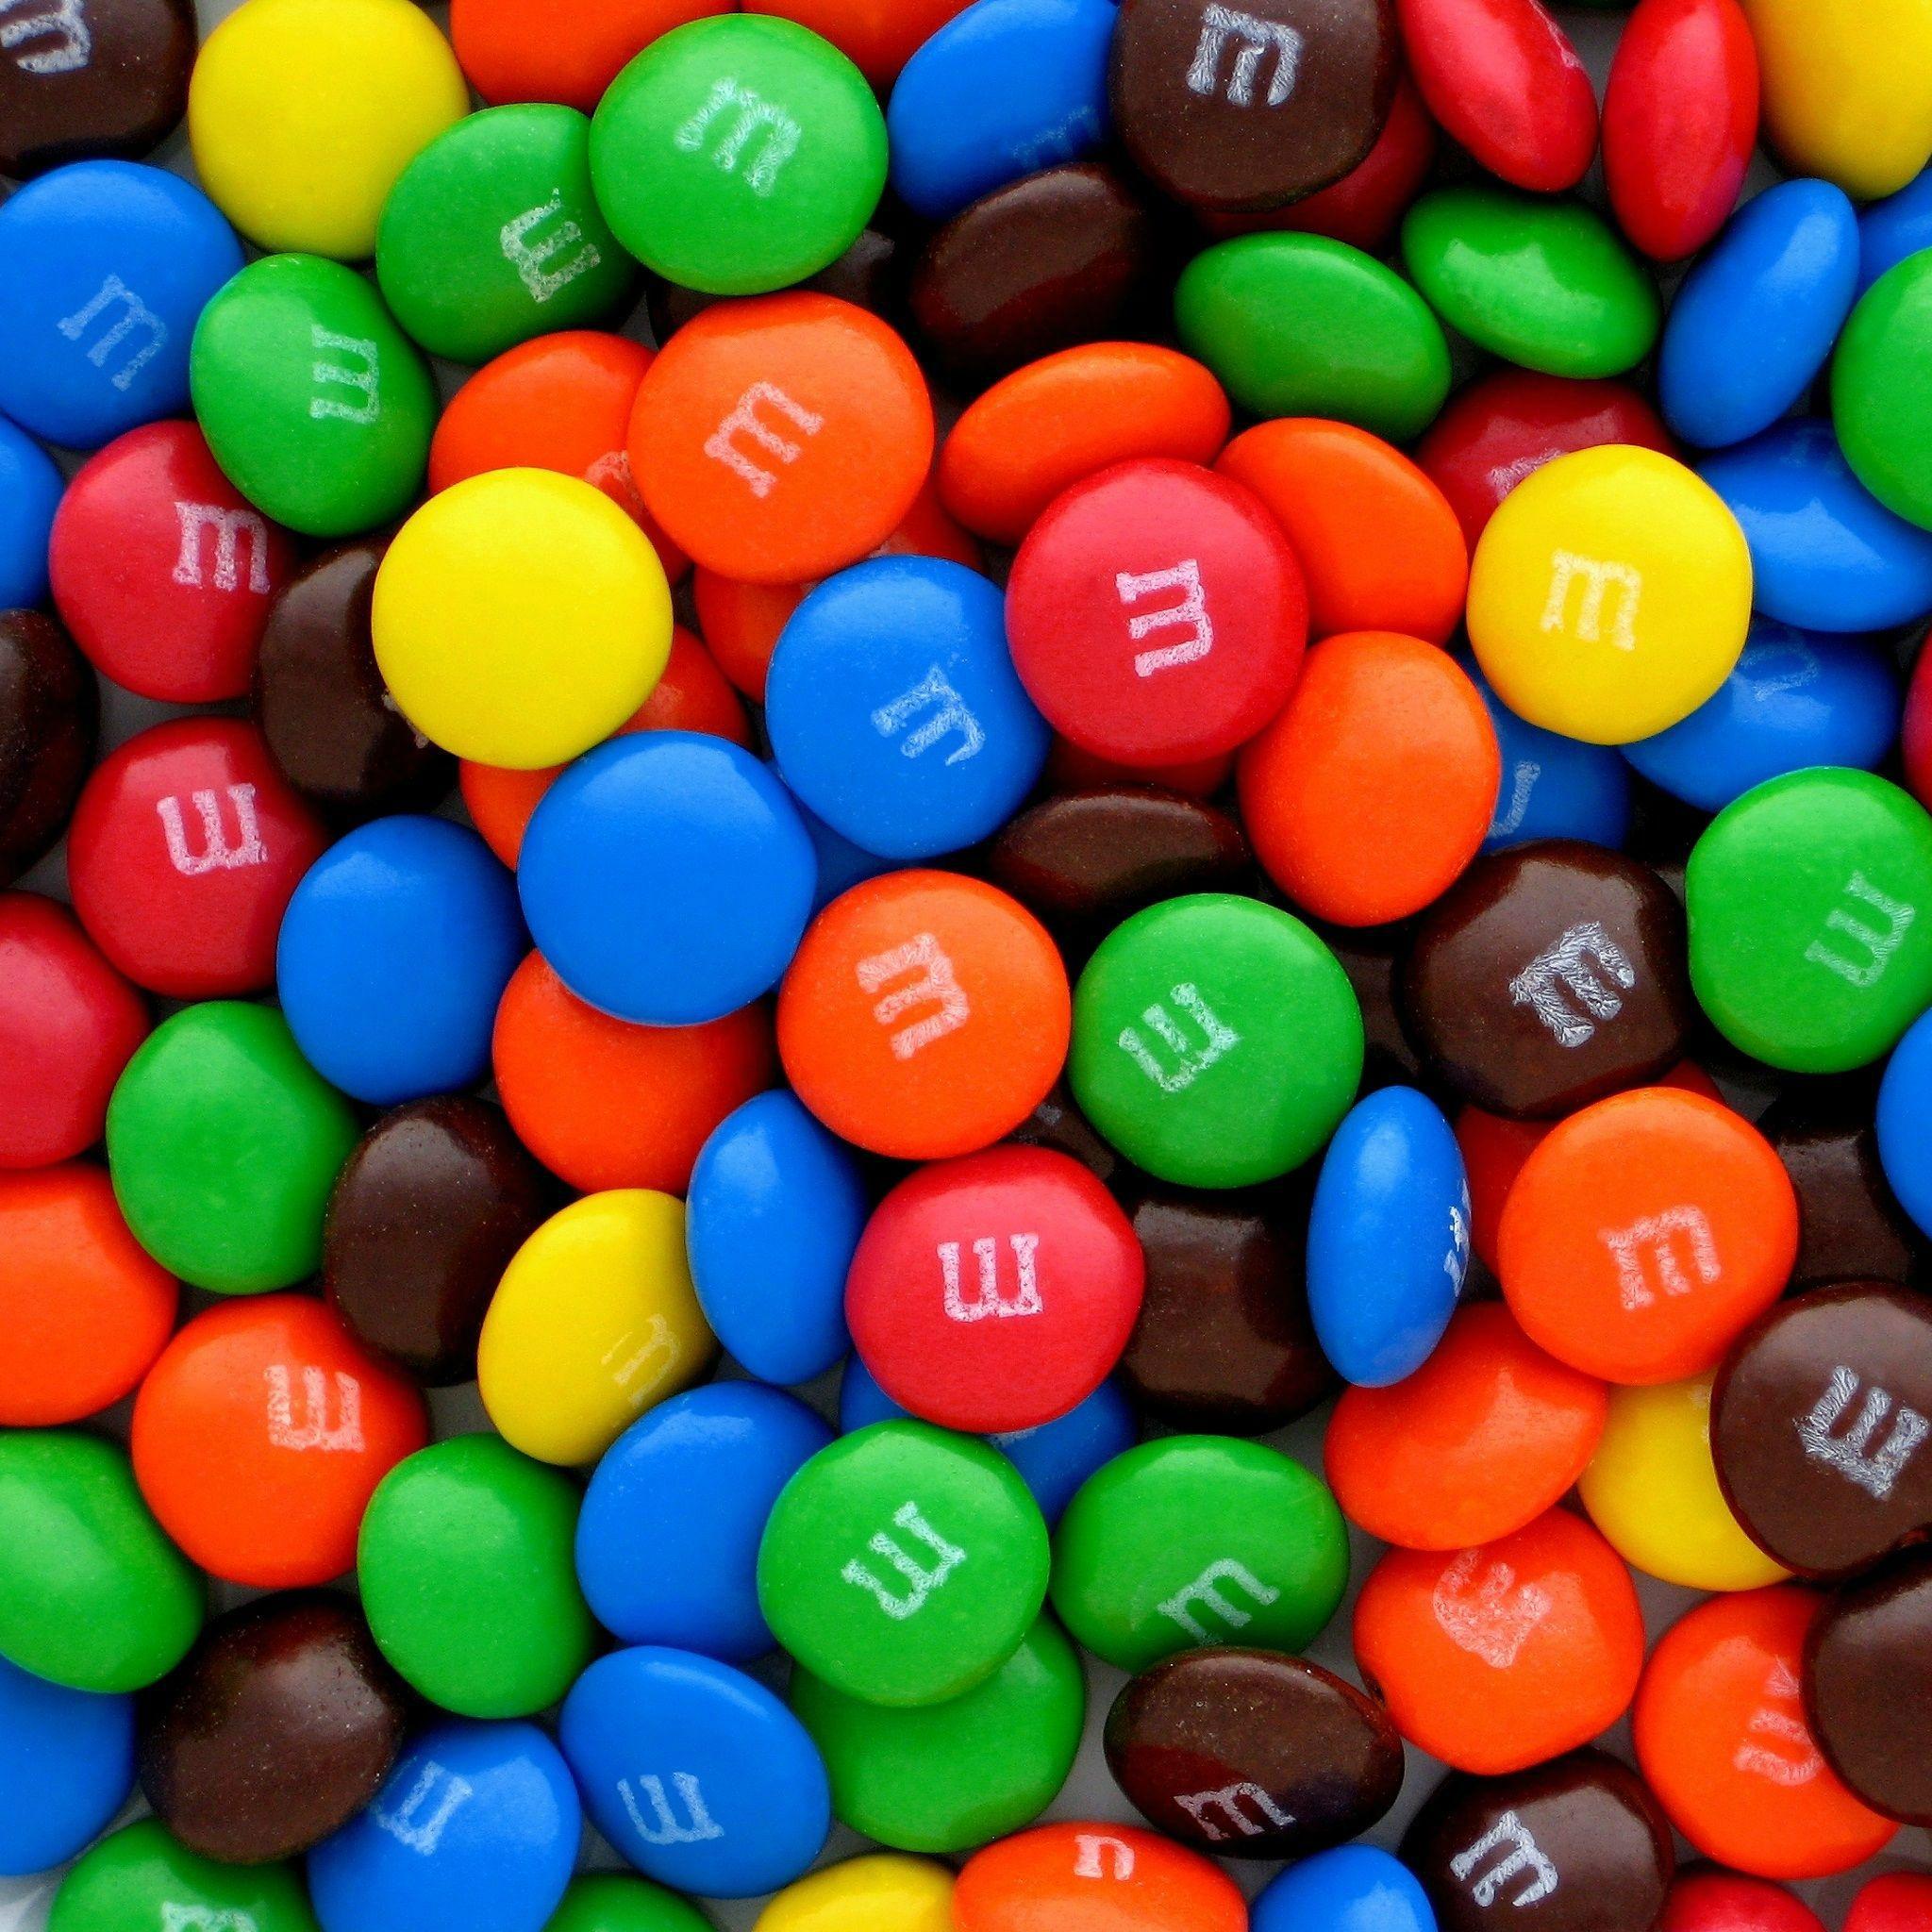 Colorful M&Ms Candy Pills Overlap iPad Air Wallpaper Download